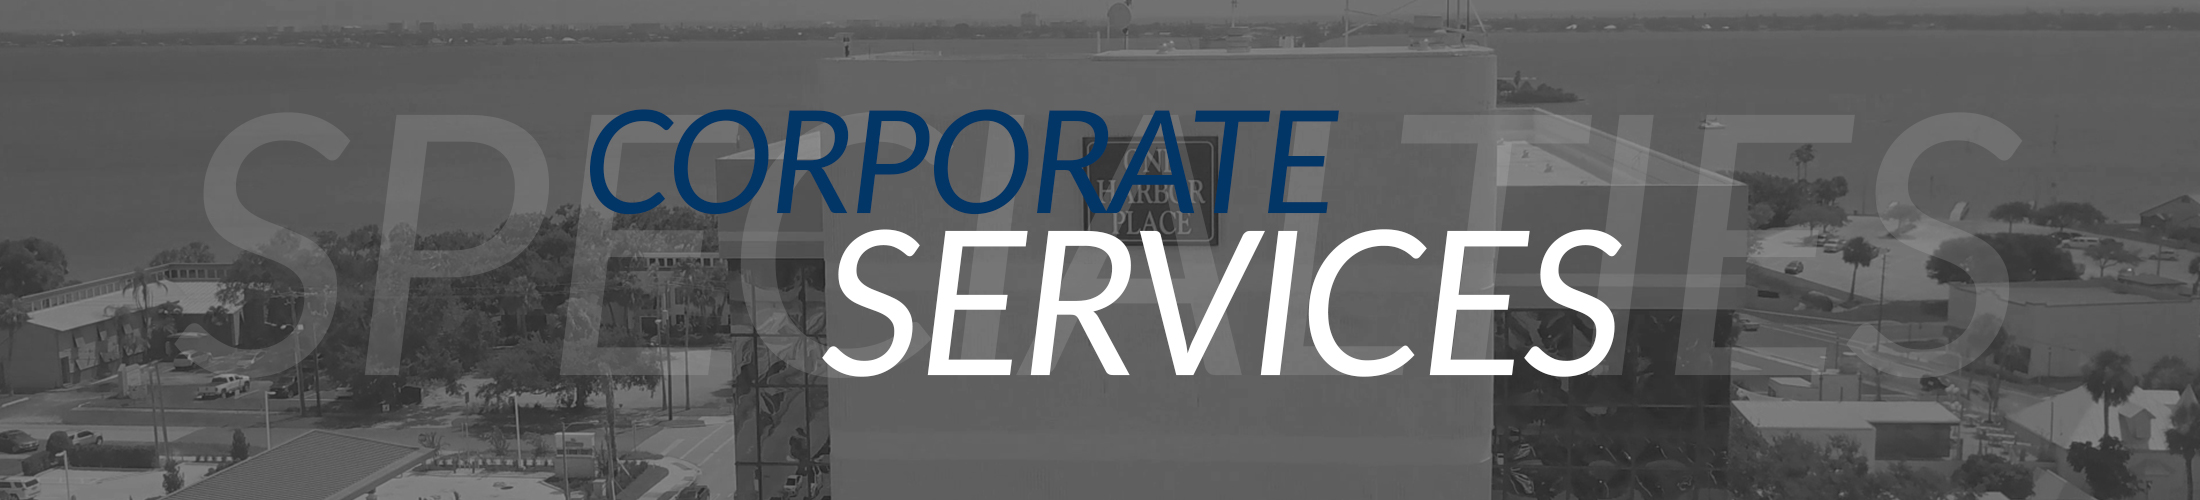 CORPORATE SERVICES Banner